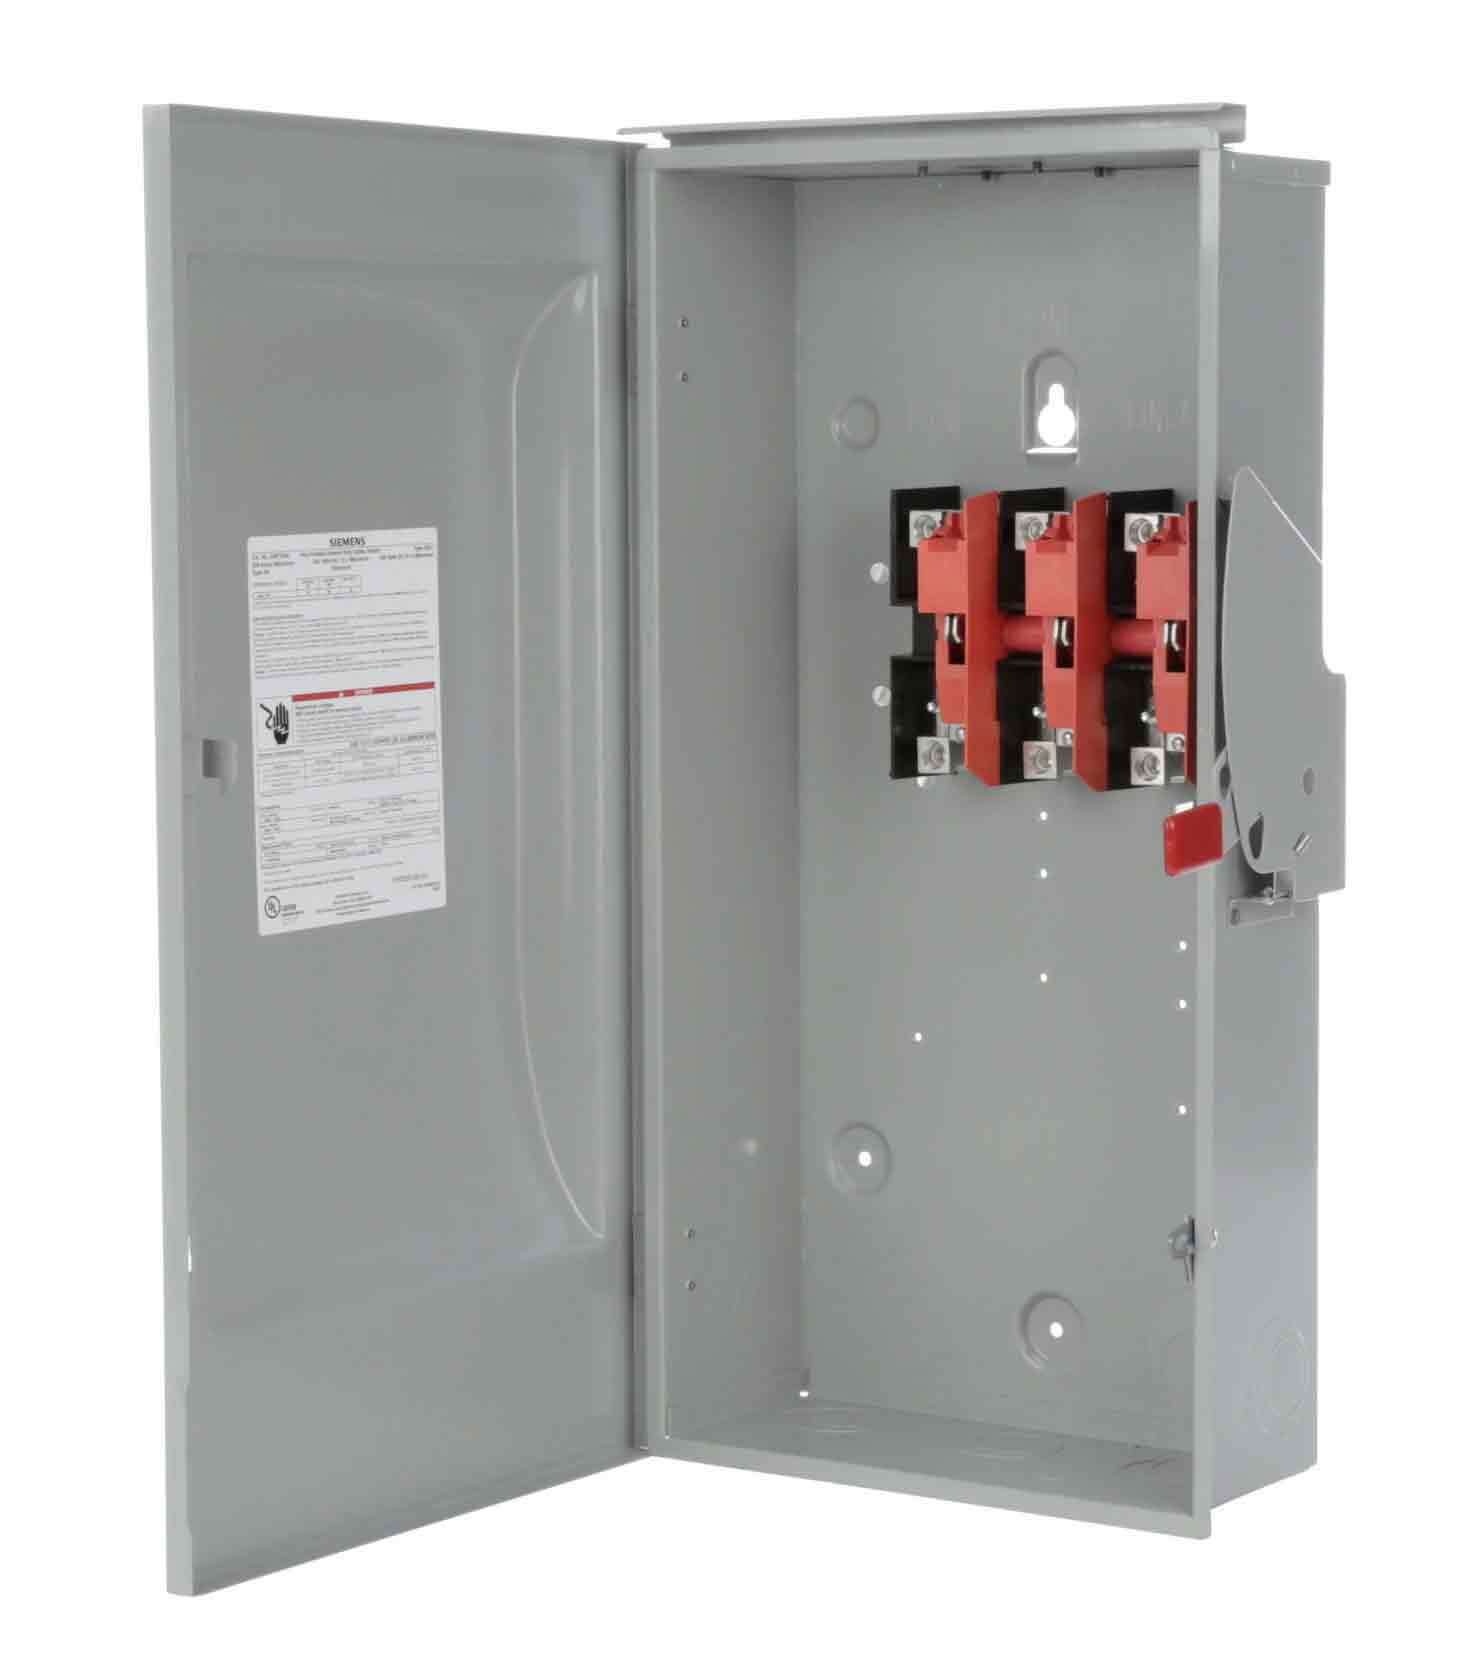 GNF324R - Siemens - 200 Amp Disconnect Safety Switches